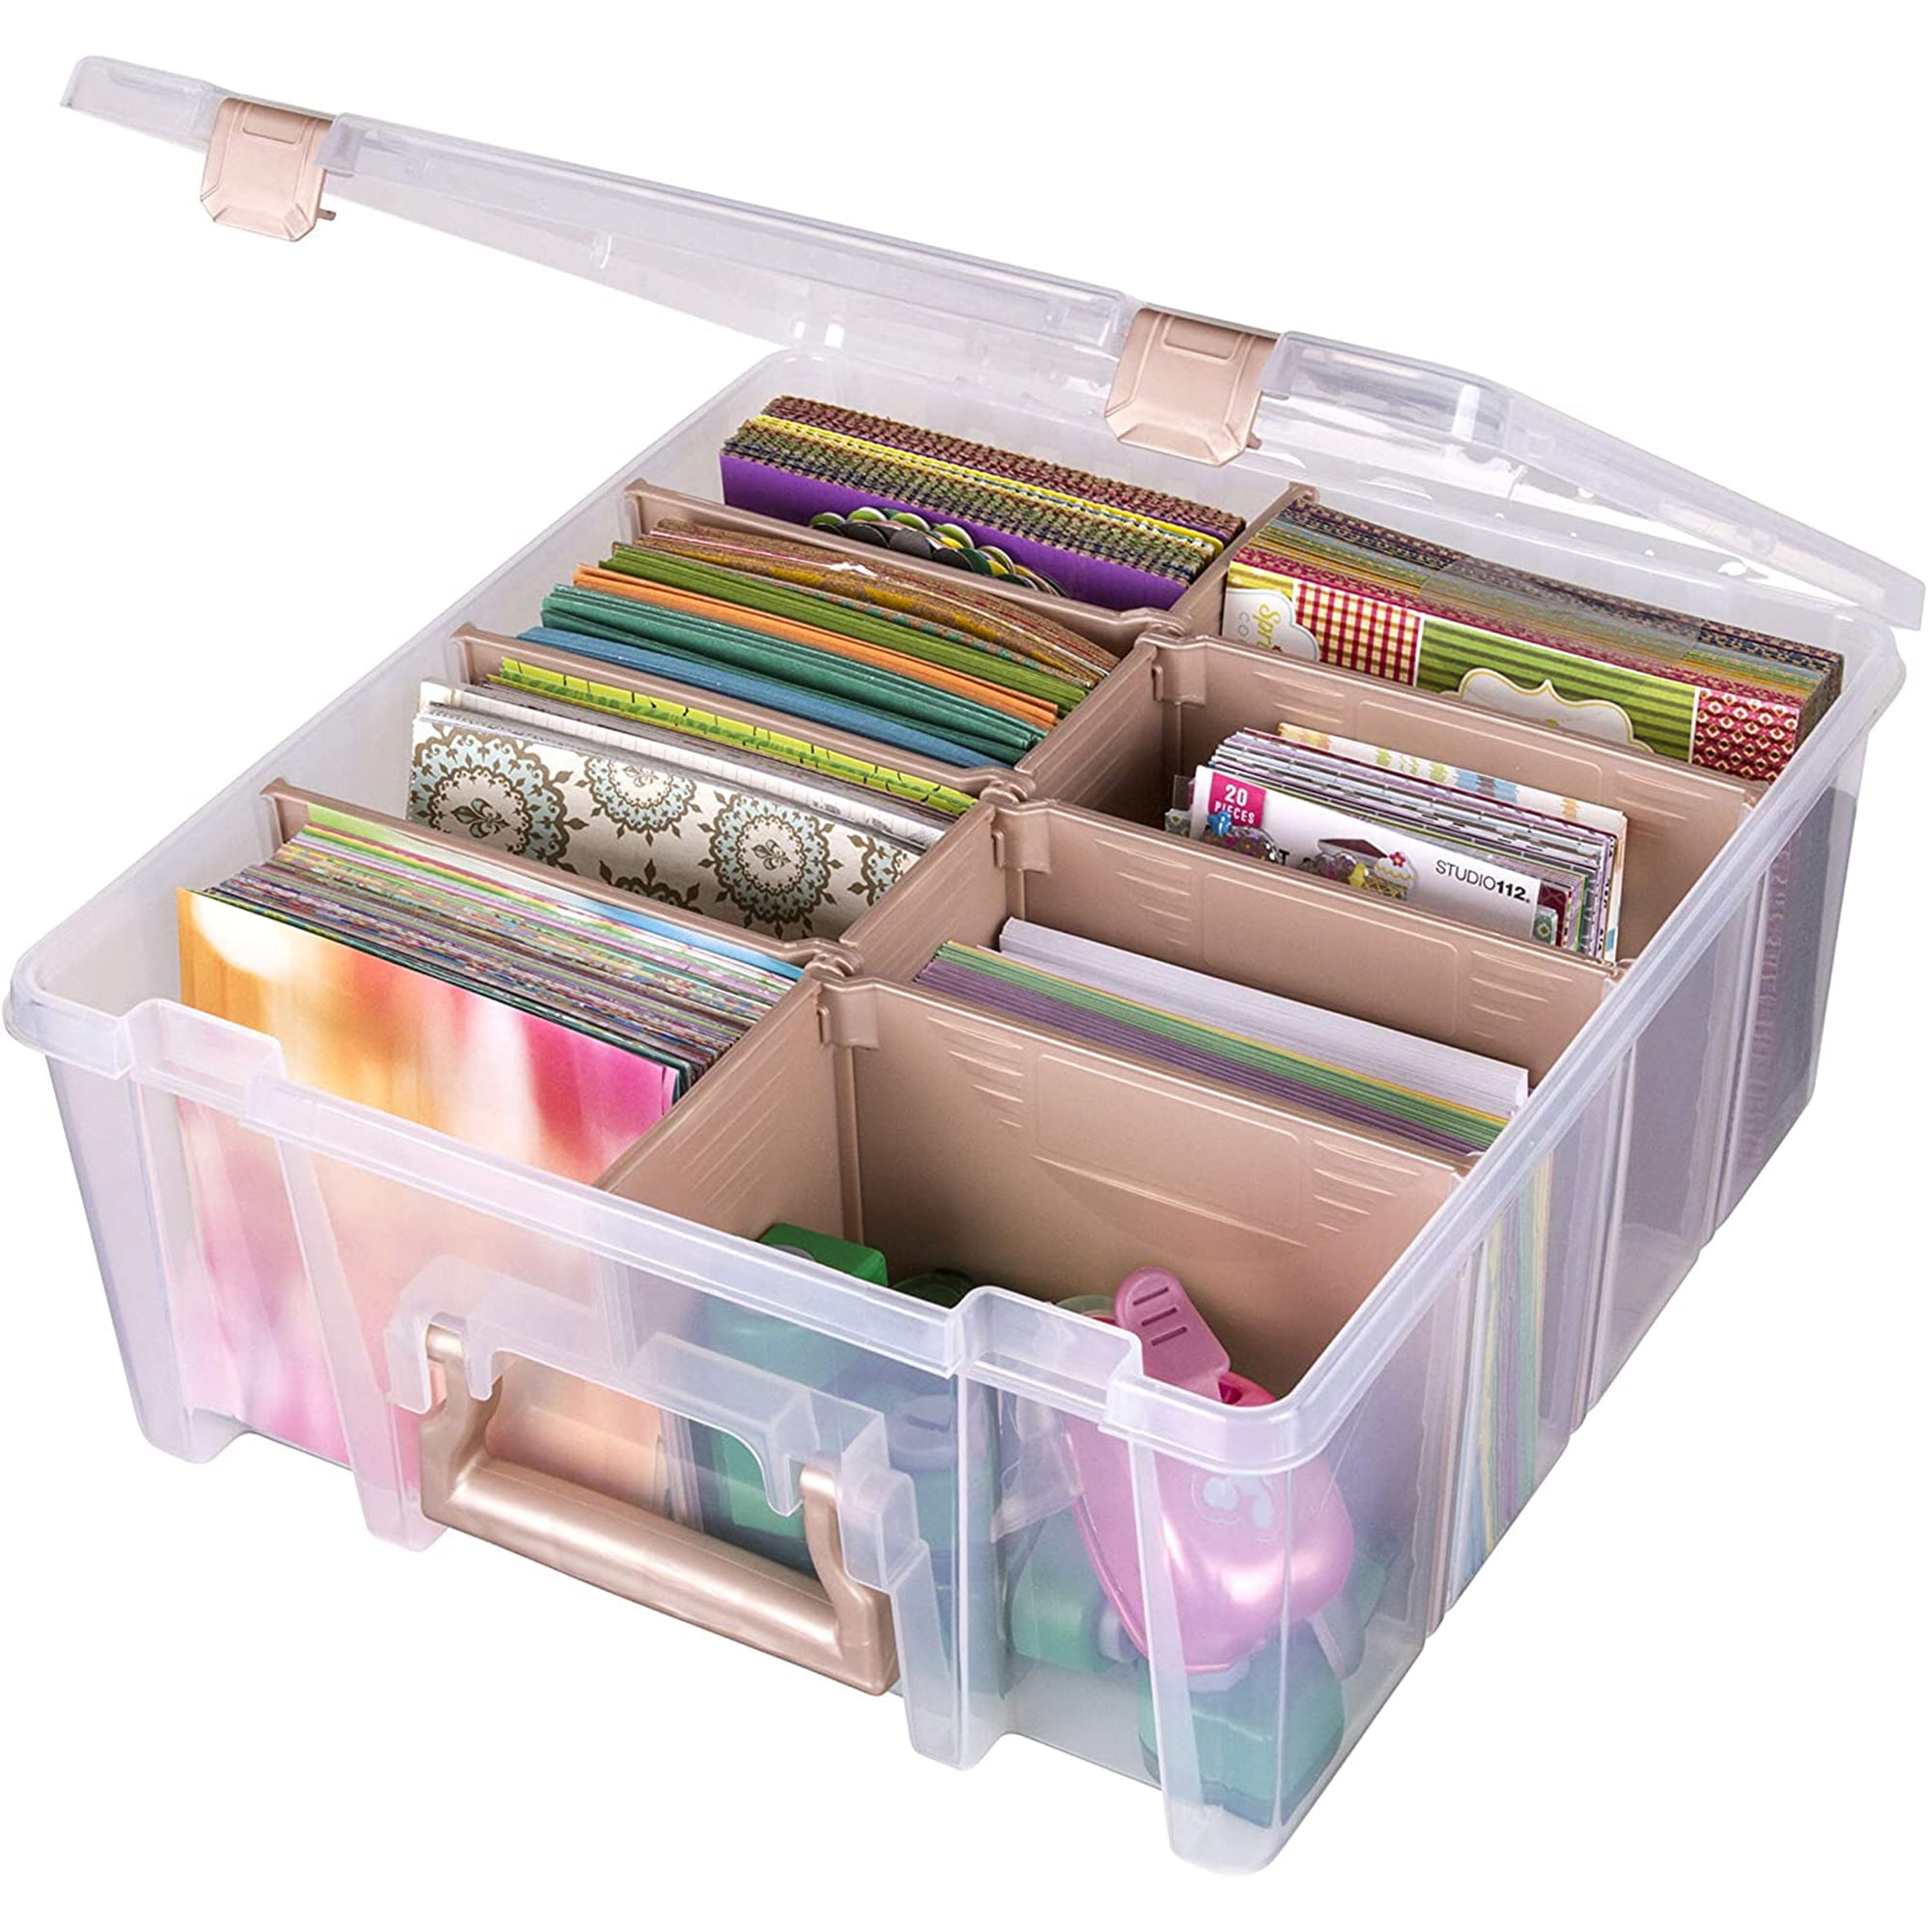 1 Pack ArtBin Super Satchel with Removable Dividers Portable Art & Craft Organizer with Handle 1 Plastic Storage Case Clear